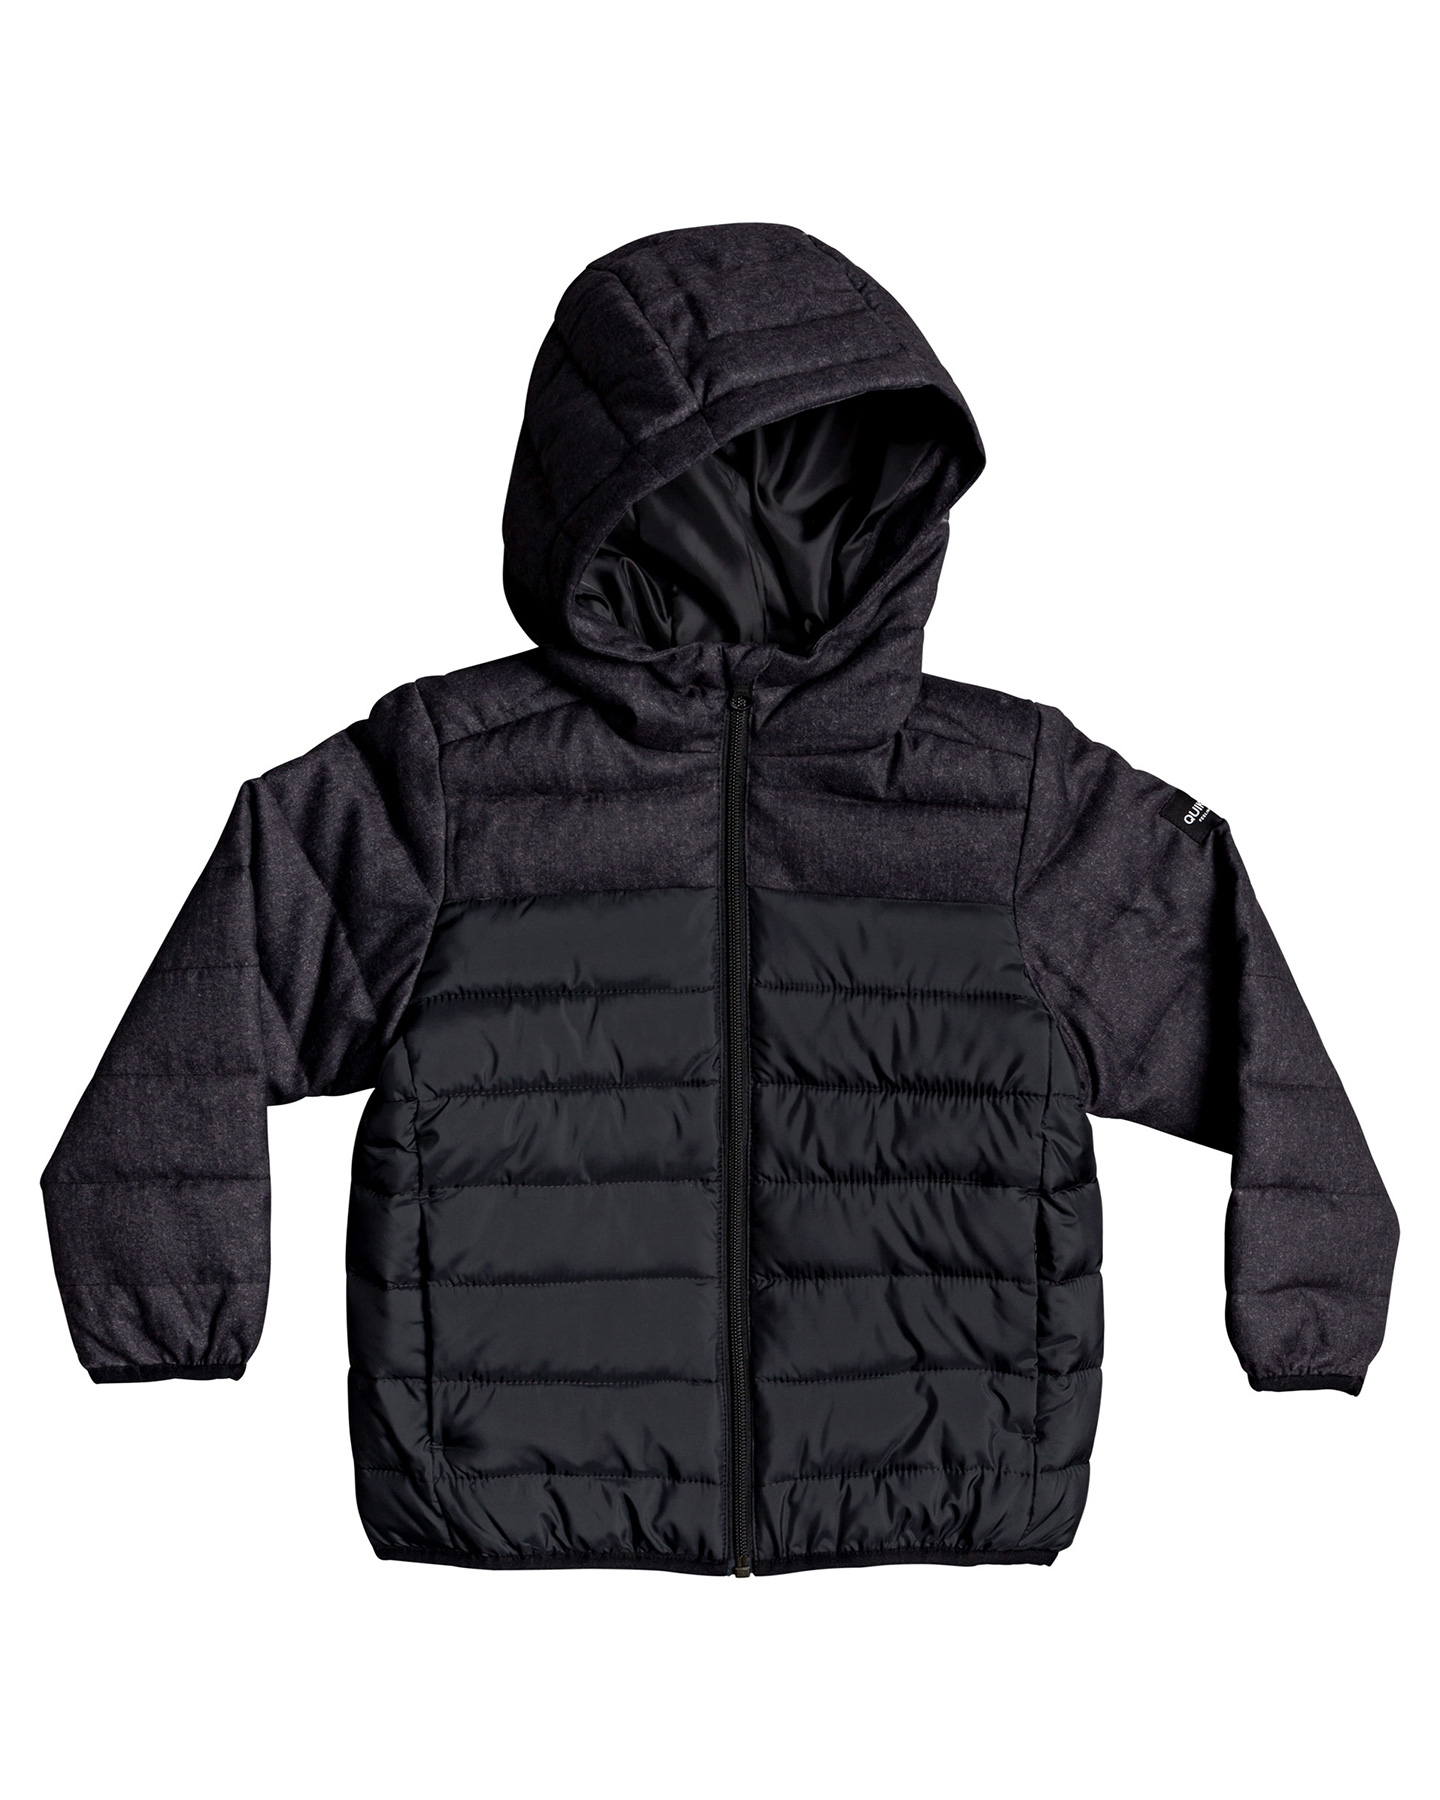 Quiksilver Boys 2-7 Scaly Mix Hooded Puffer Jacket - Black | SurfStitch